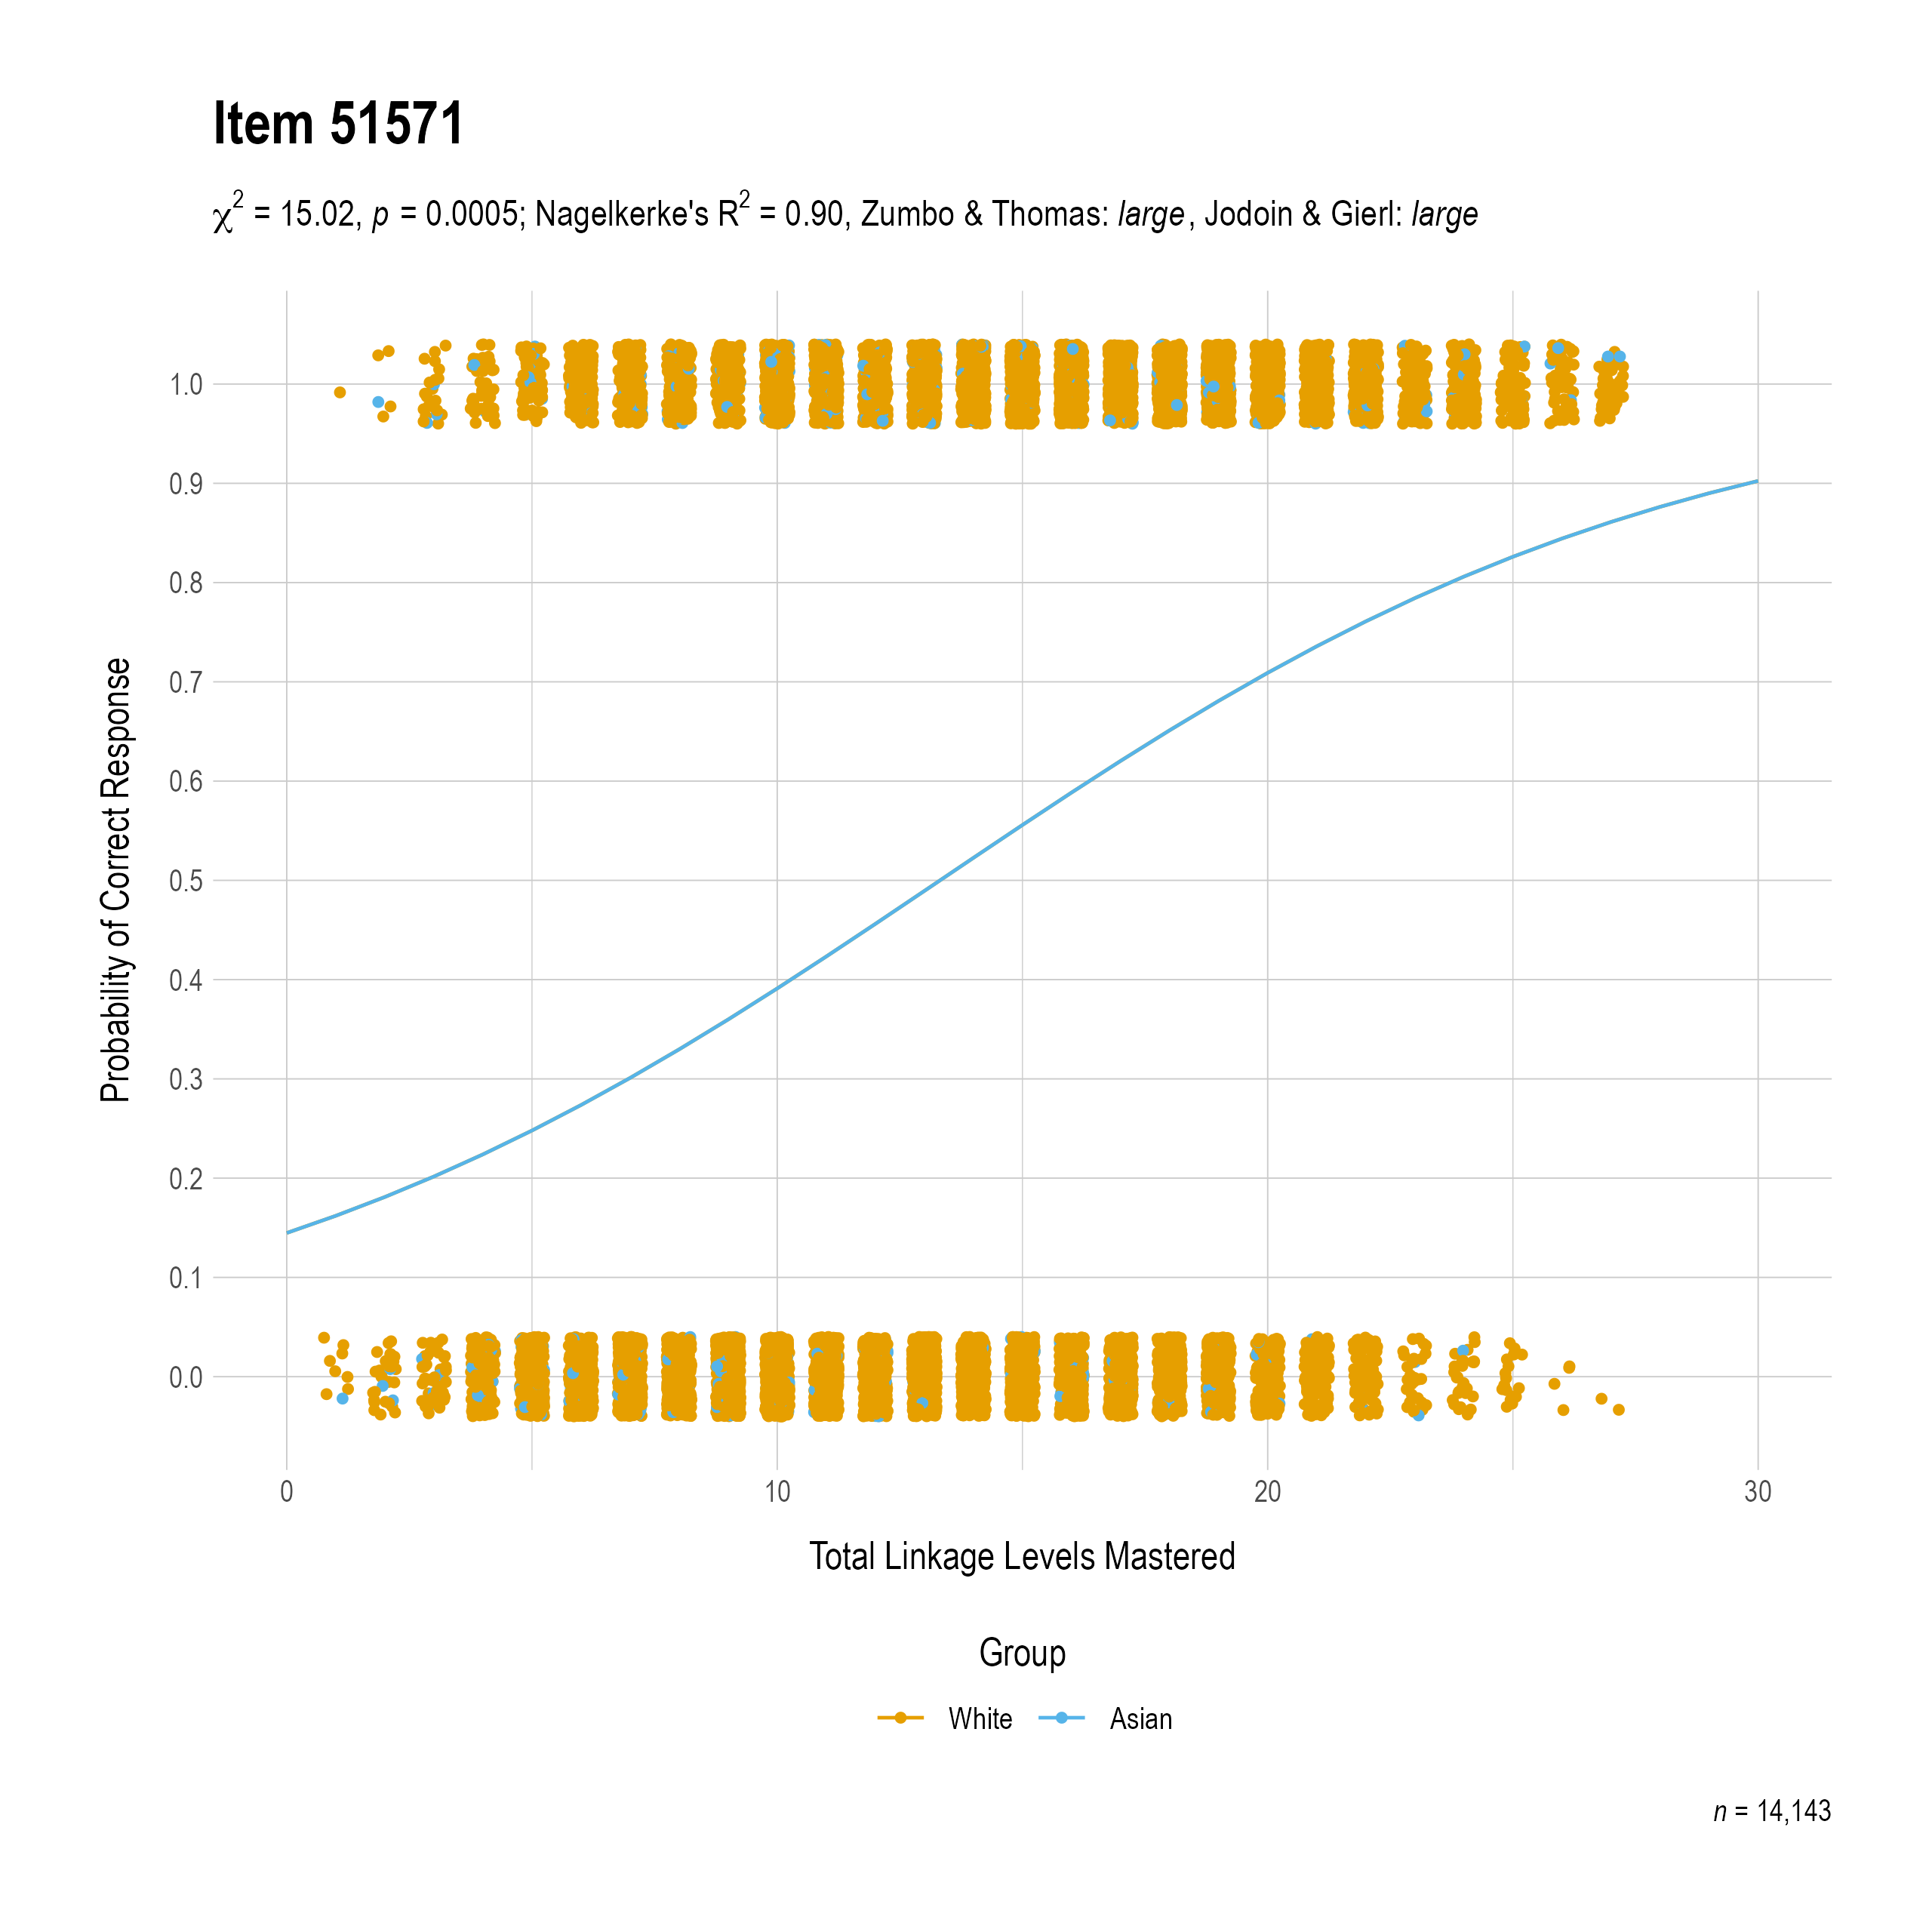 The plot of the combined race differential item function evidence for Science item 51571. The figure contains points shaded by group. The figure also contains a logistic regression curve for each group. The total linkage levels mastered in is on the x-axis, and the probability of a correct response is on the y-axis.